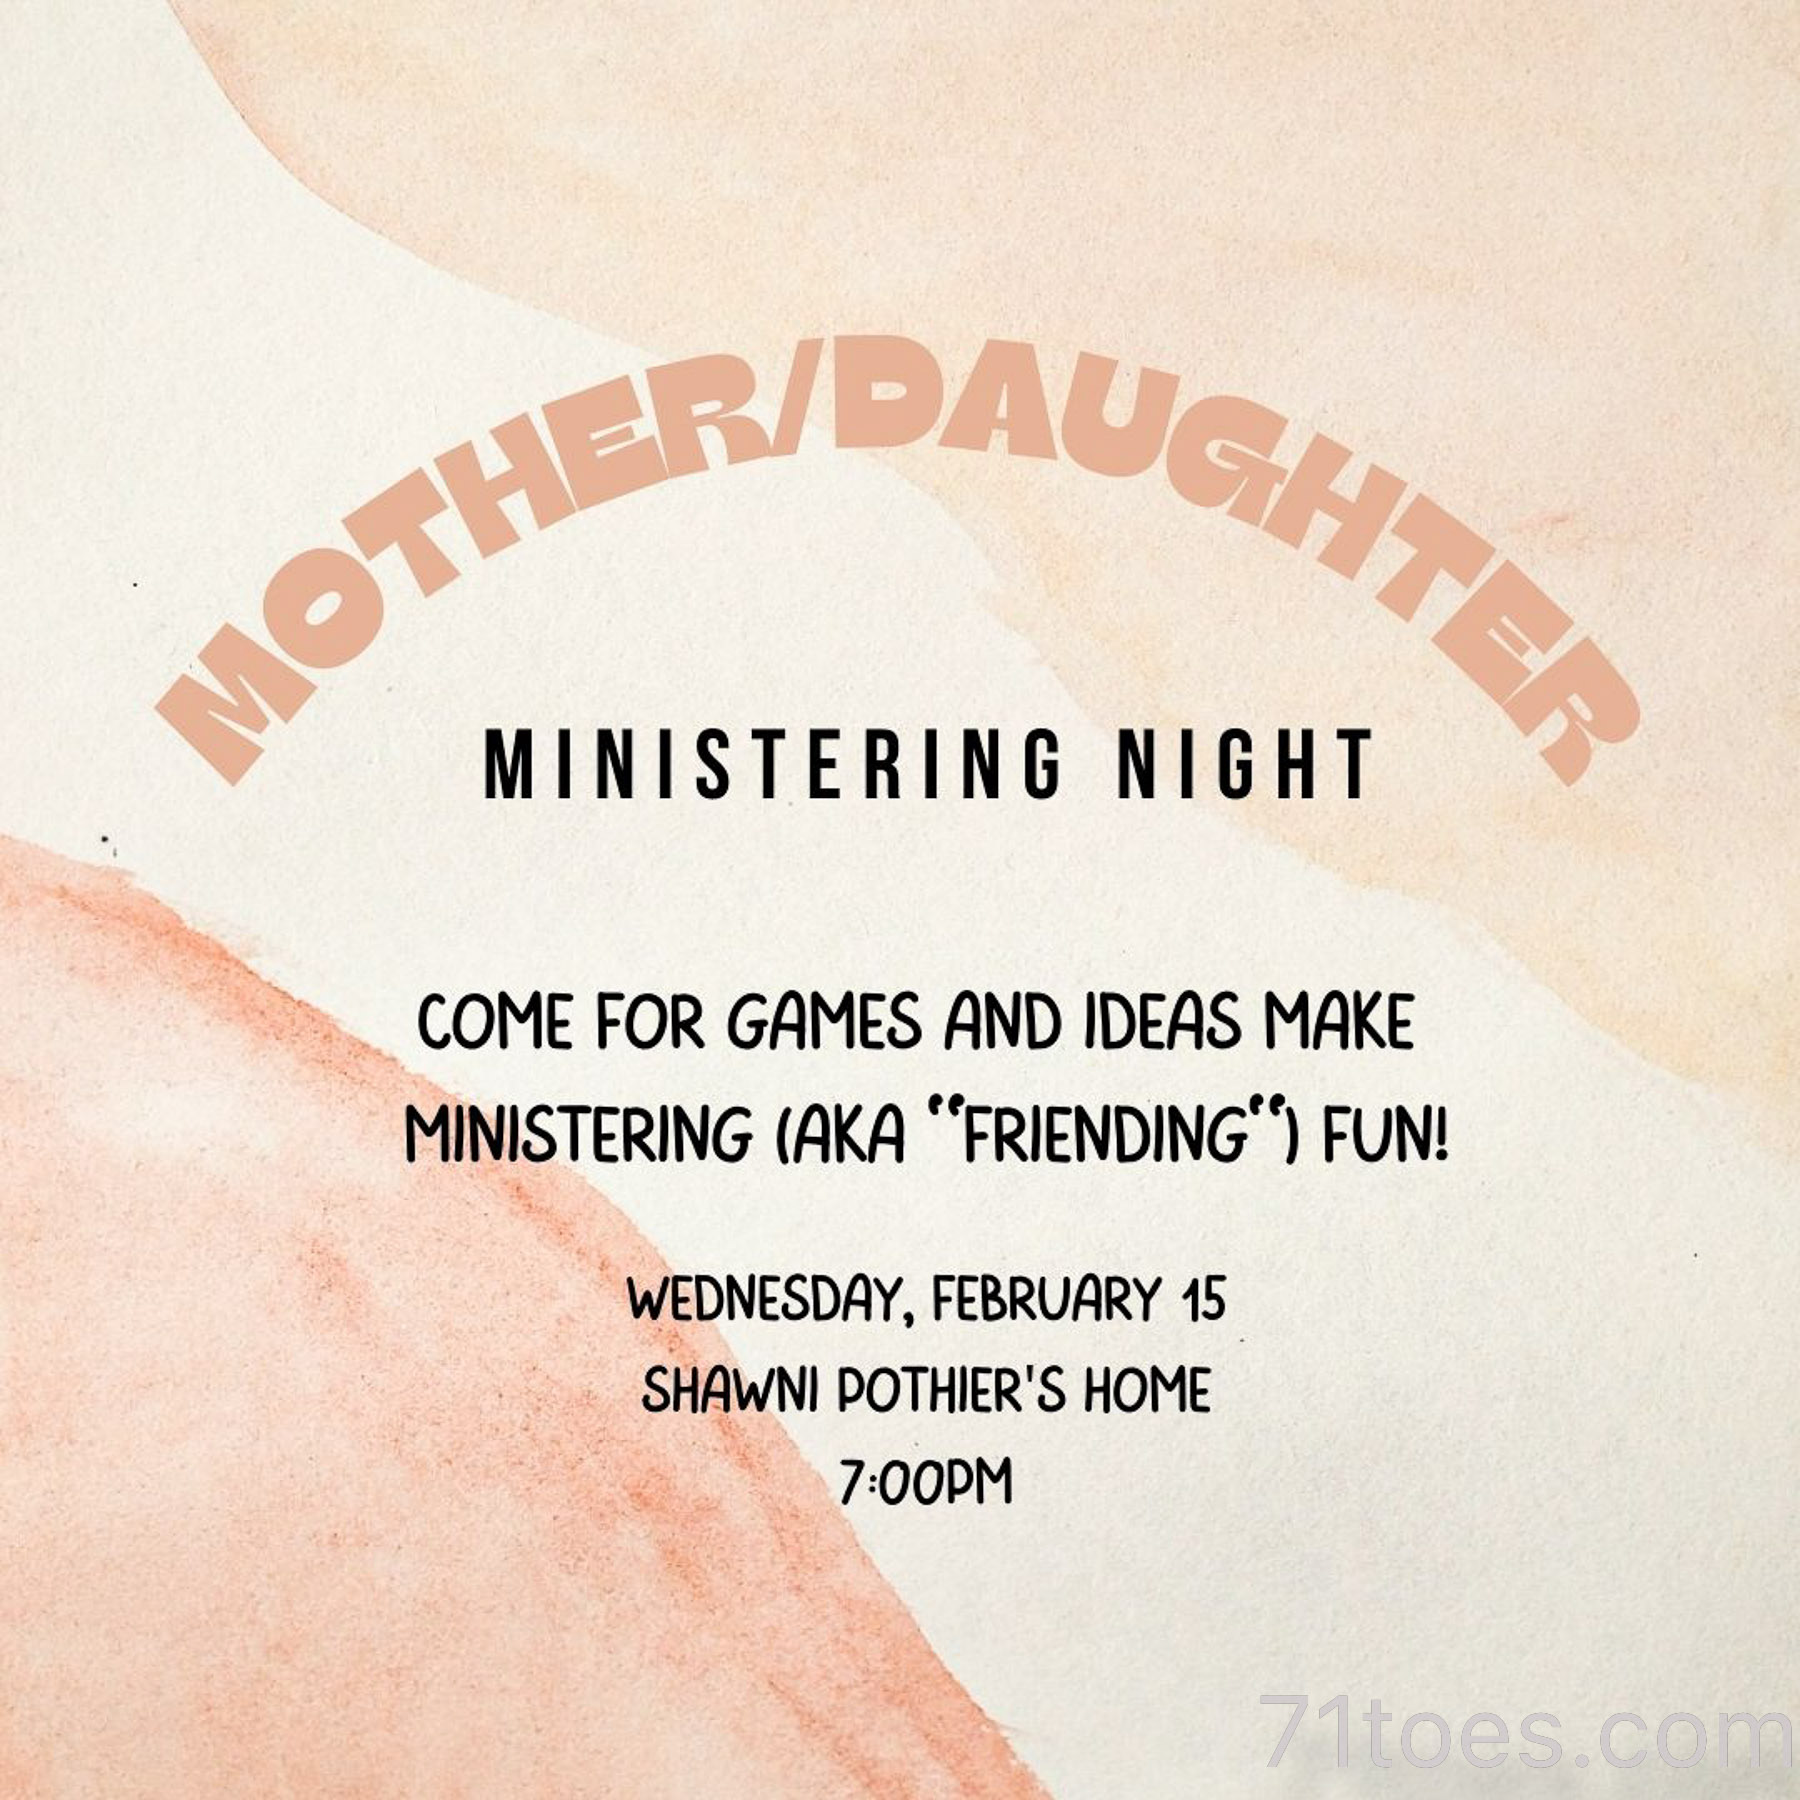 An invitation for an event to help mothers and daughters learn to reach out and serve together.